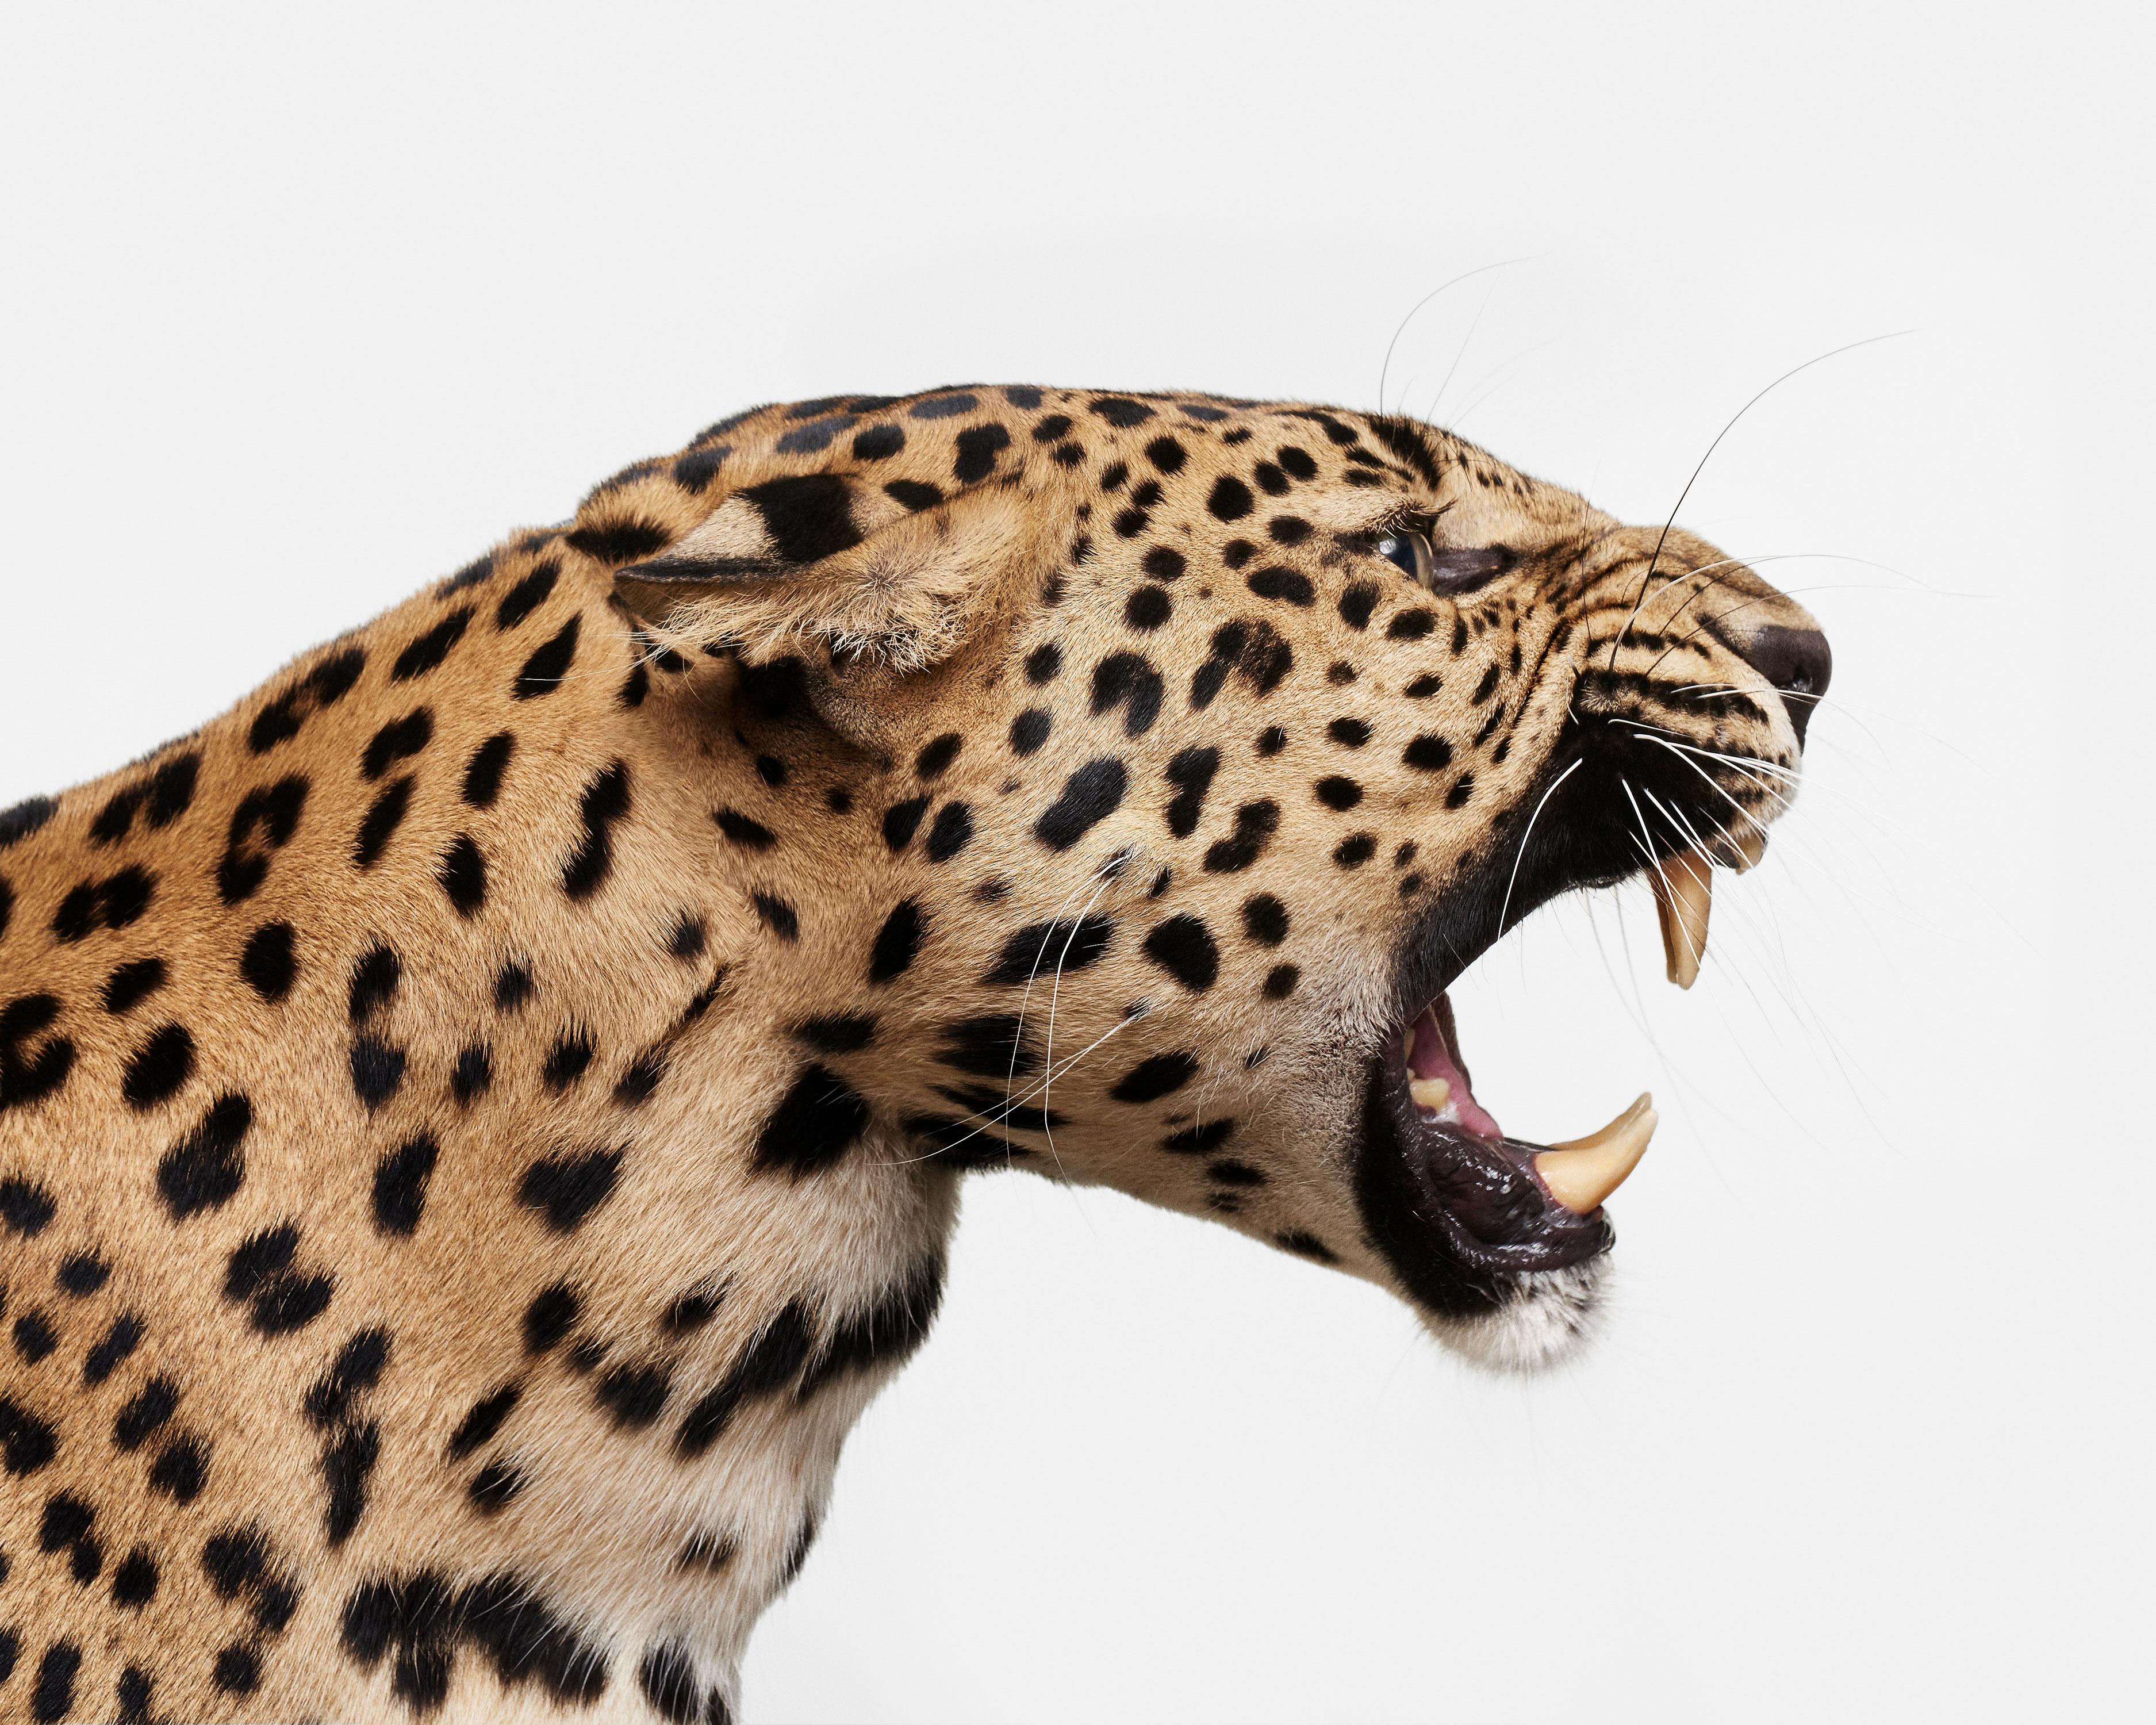 Randal Ford Color Photograph - Spotted Leopard Snarl (30" x 37.5")